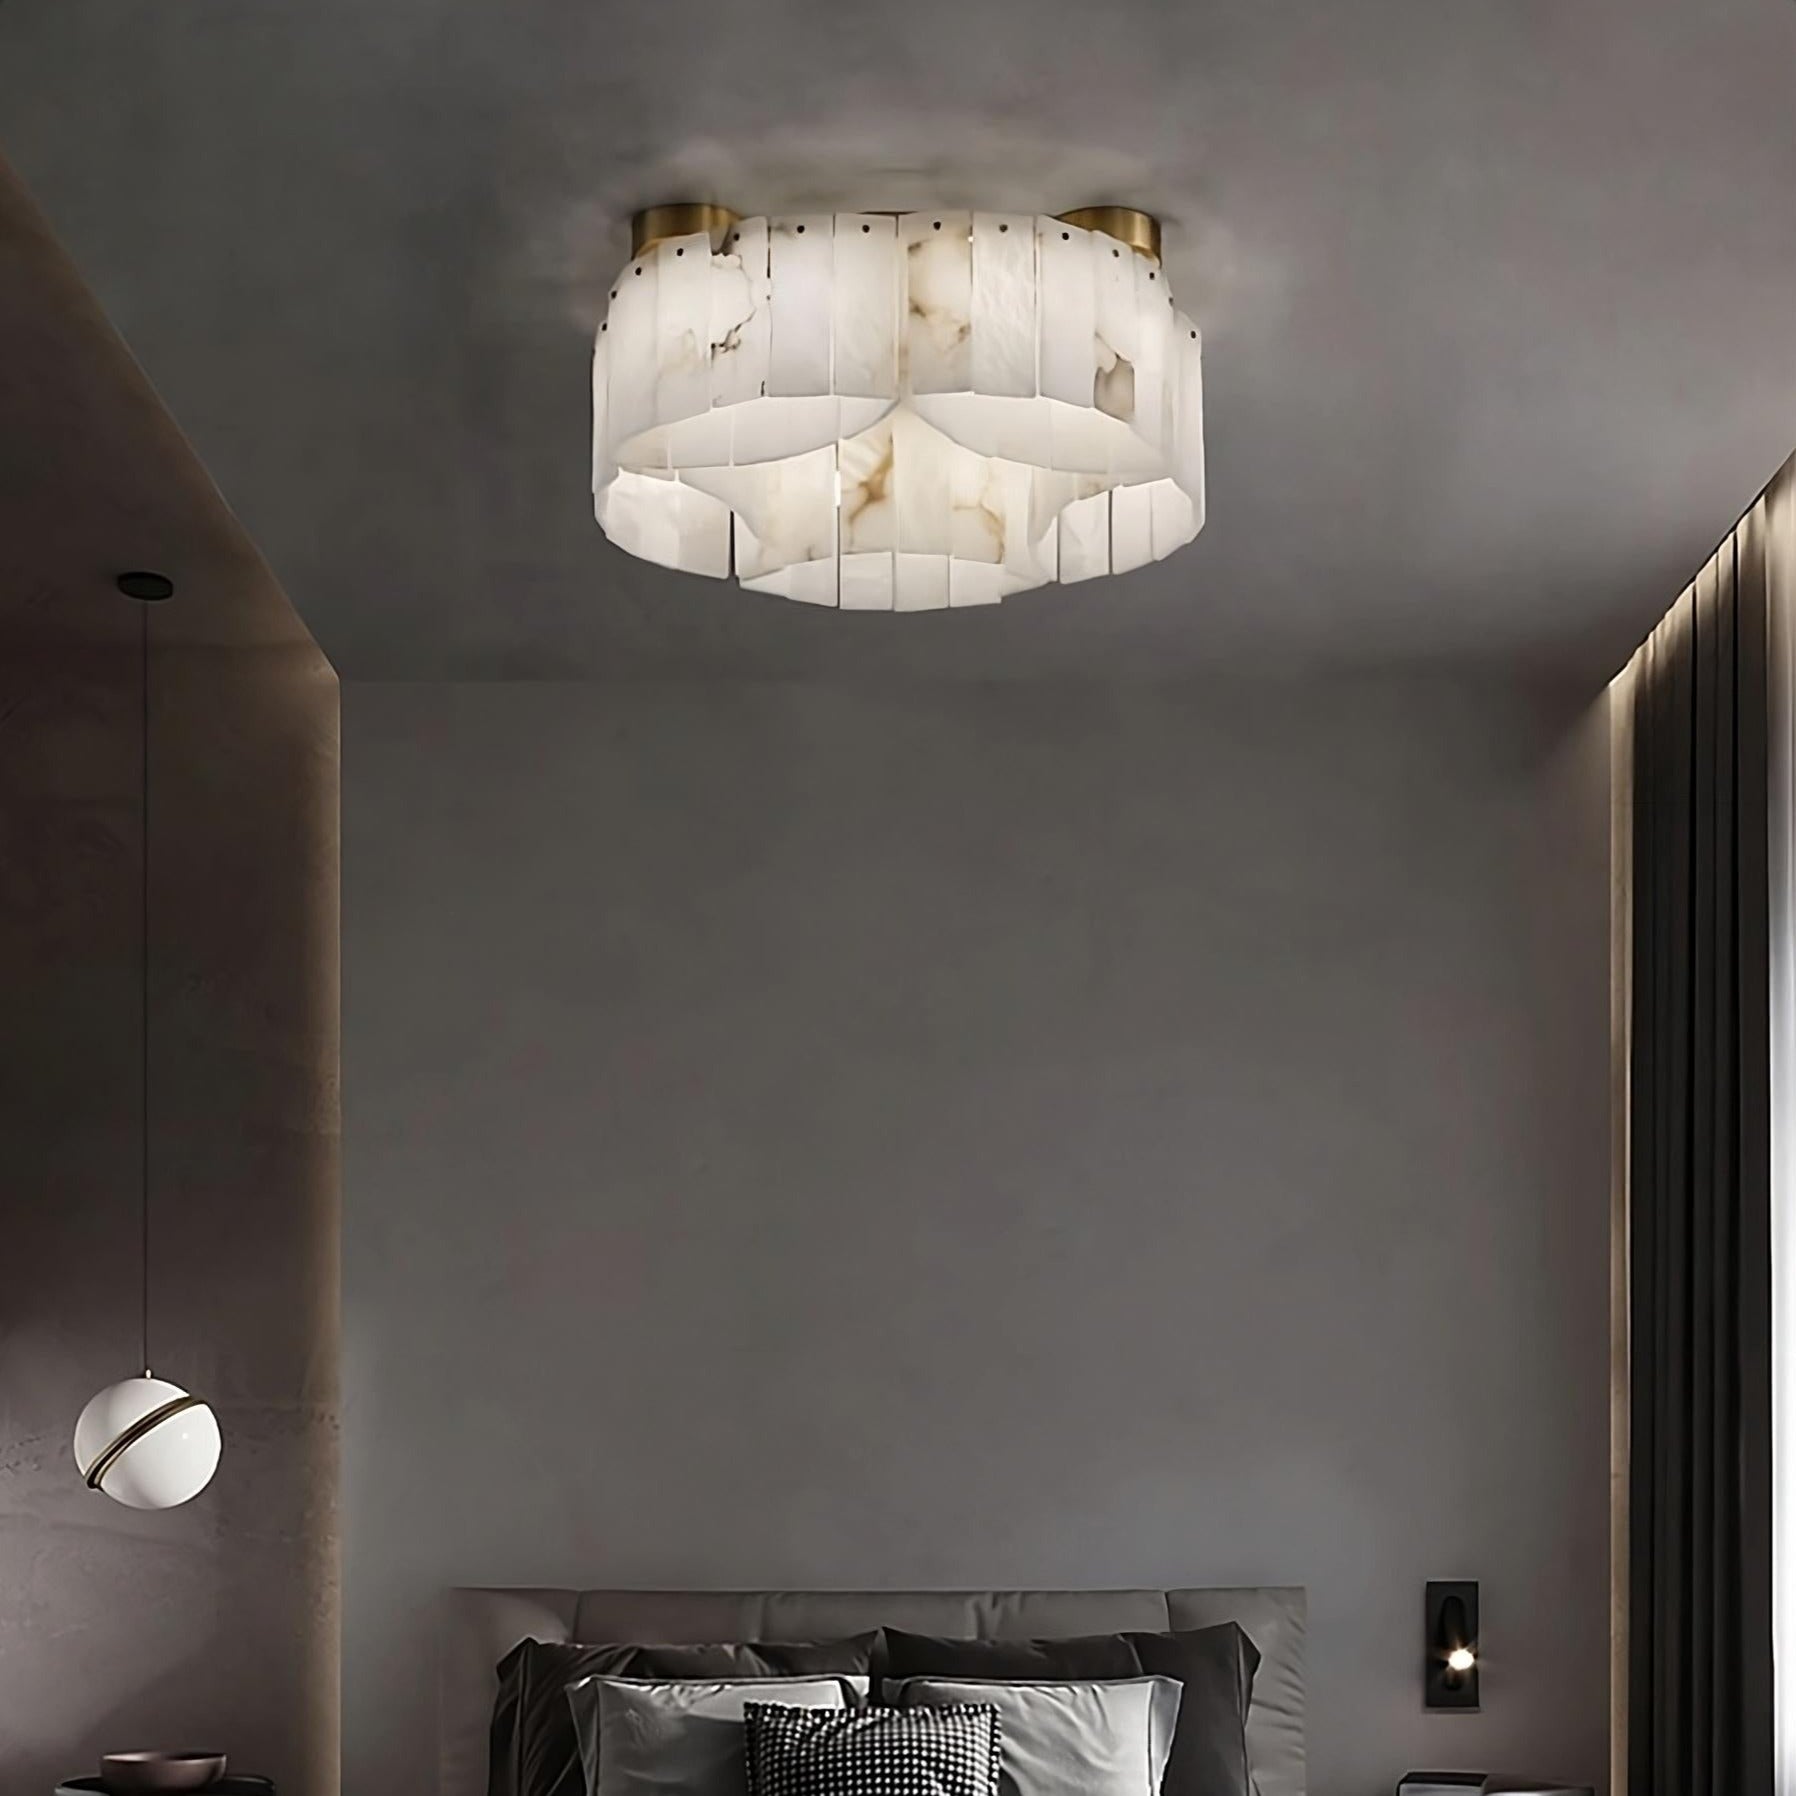 A modern bedroom featuring a large, elegant bed with gray bedding and multiple pillows. A unique, translucent Moonshade Natural Marble Ceiling Light Fixture from Morsale.com hangs from the ceiling. The room also includes minimalistic nightstands, a wall sconce, and a spherical pendant light, enhancing the modern aesthetic lighting.